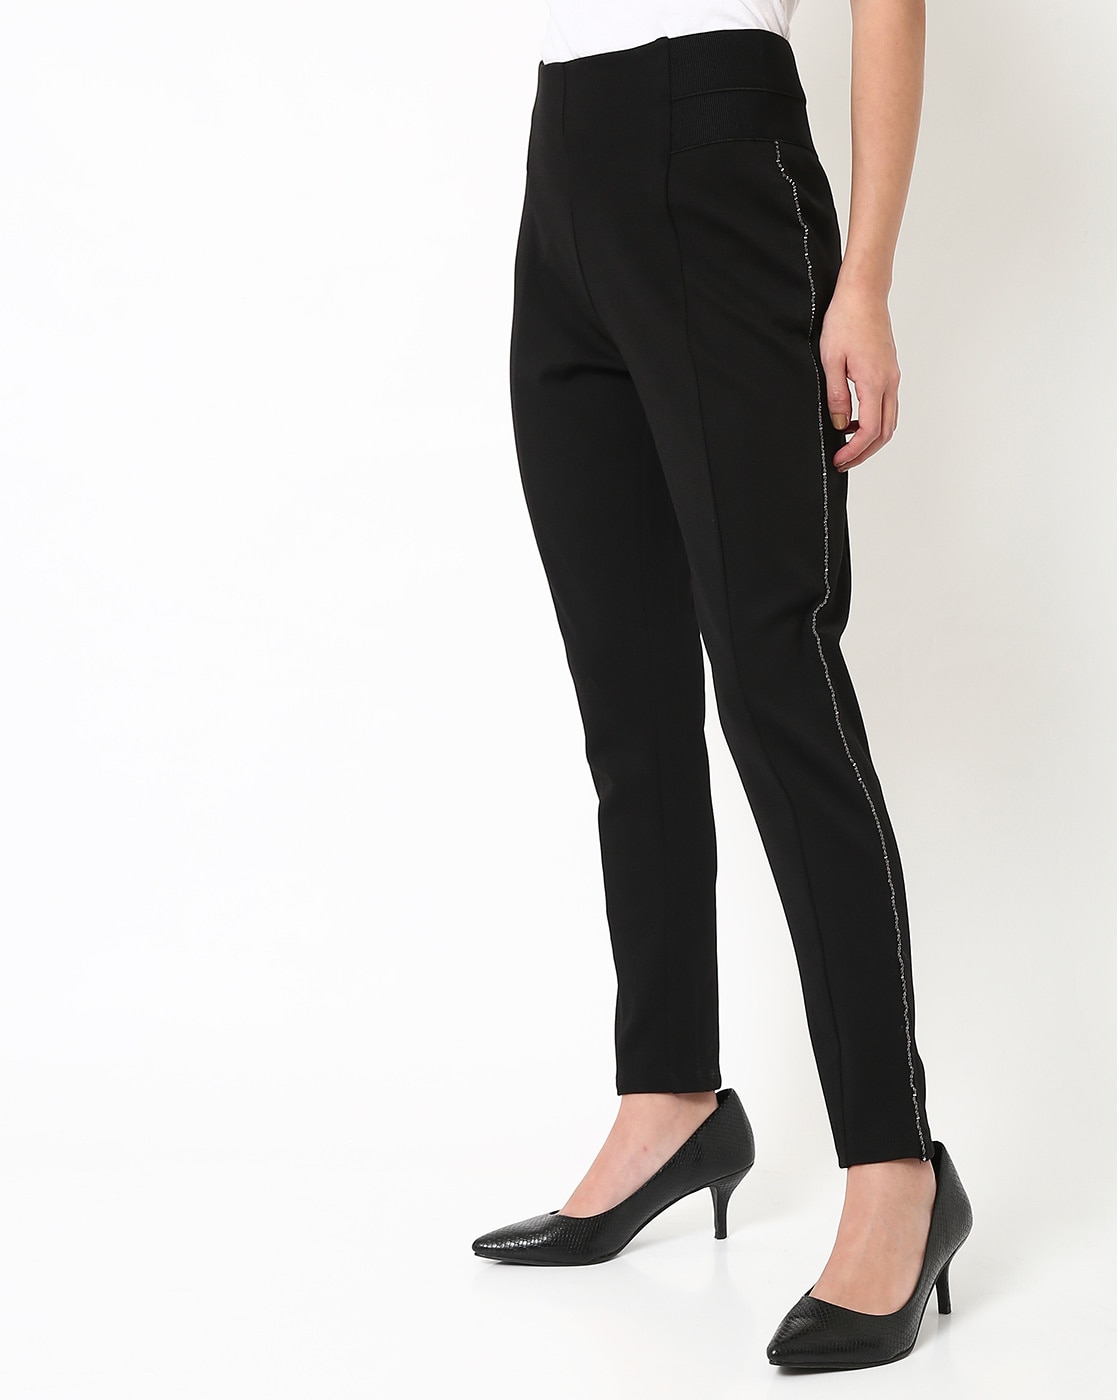 FIGS - She's here — the Tokha Trouser Pant. A mid-ride... | Facebook